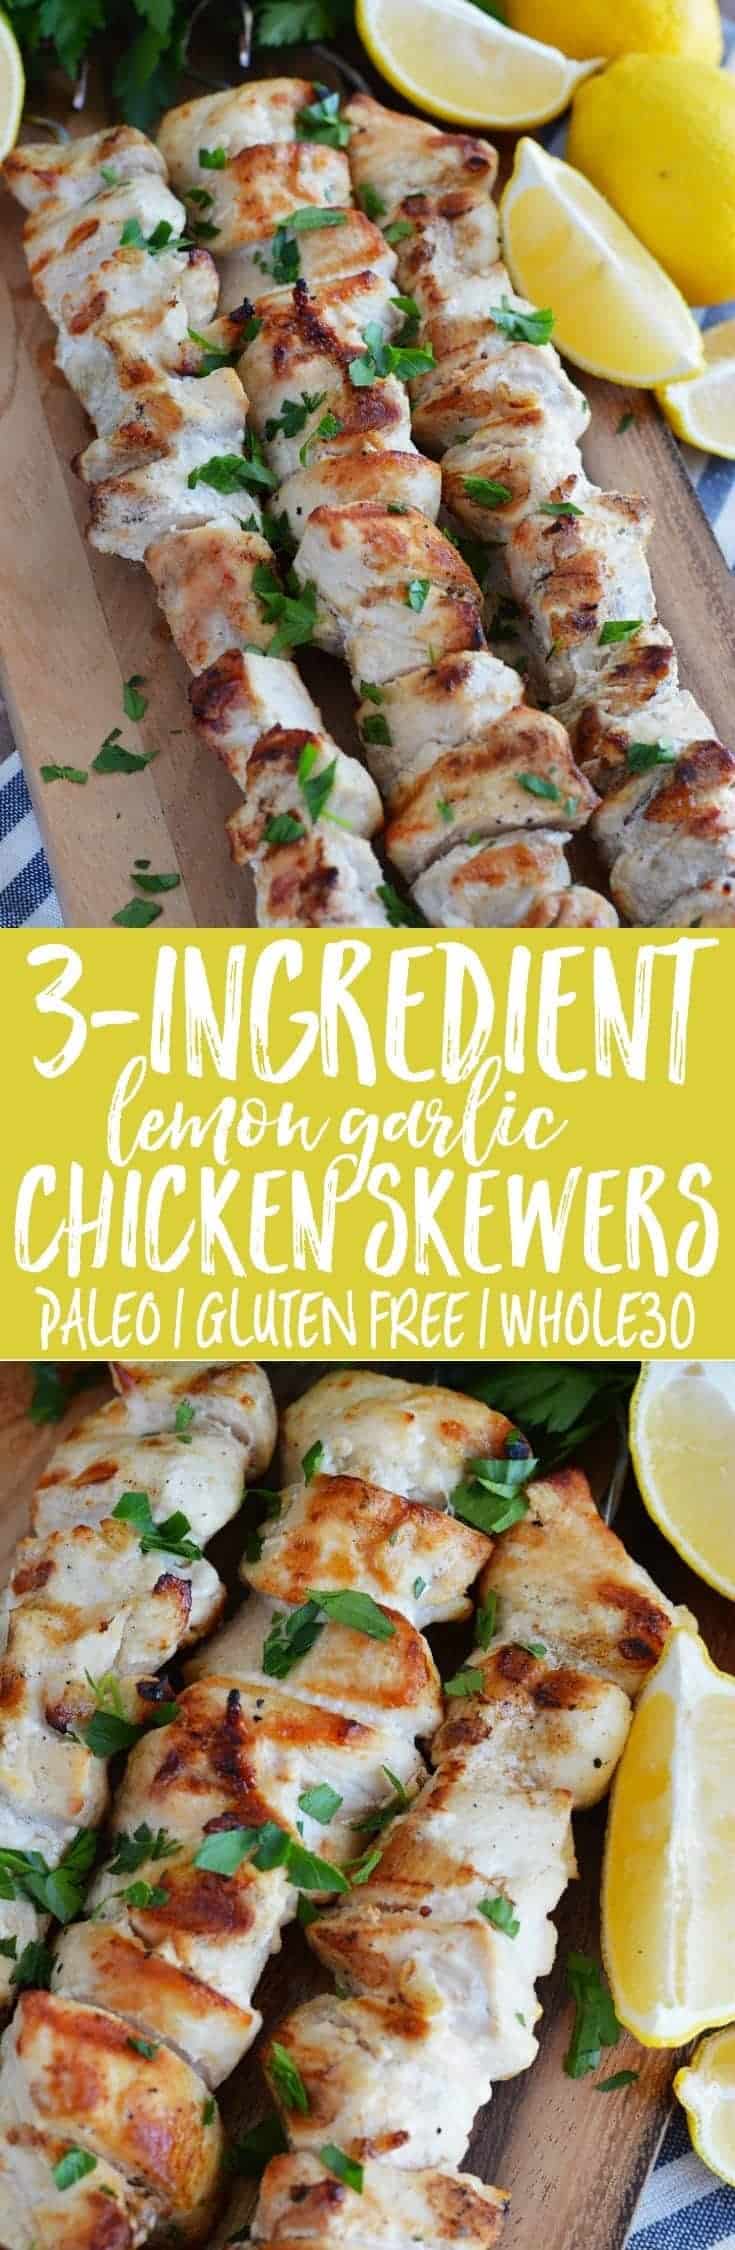 Three-Ingredient Lemon Garlic Chicken Skewers from What The Fork Food Blog. These skewers are paleo, Whole30, easy, and are perfect meal-prep. | whattheforkfoodblog.com